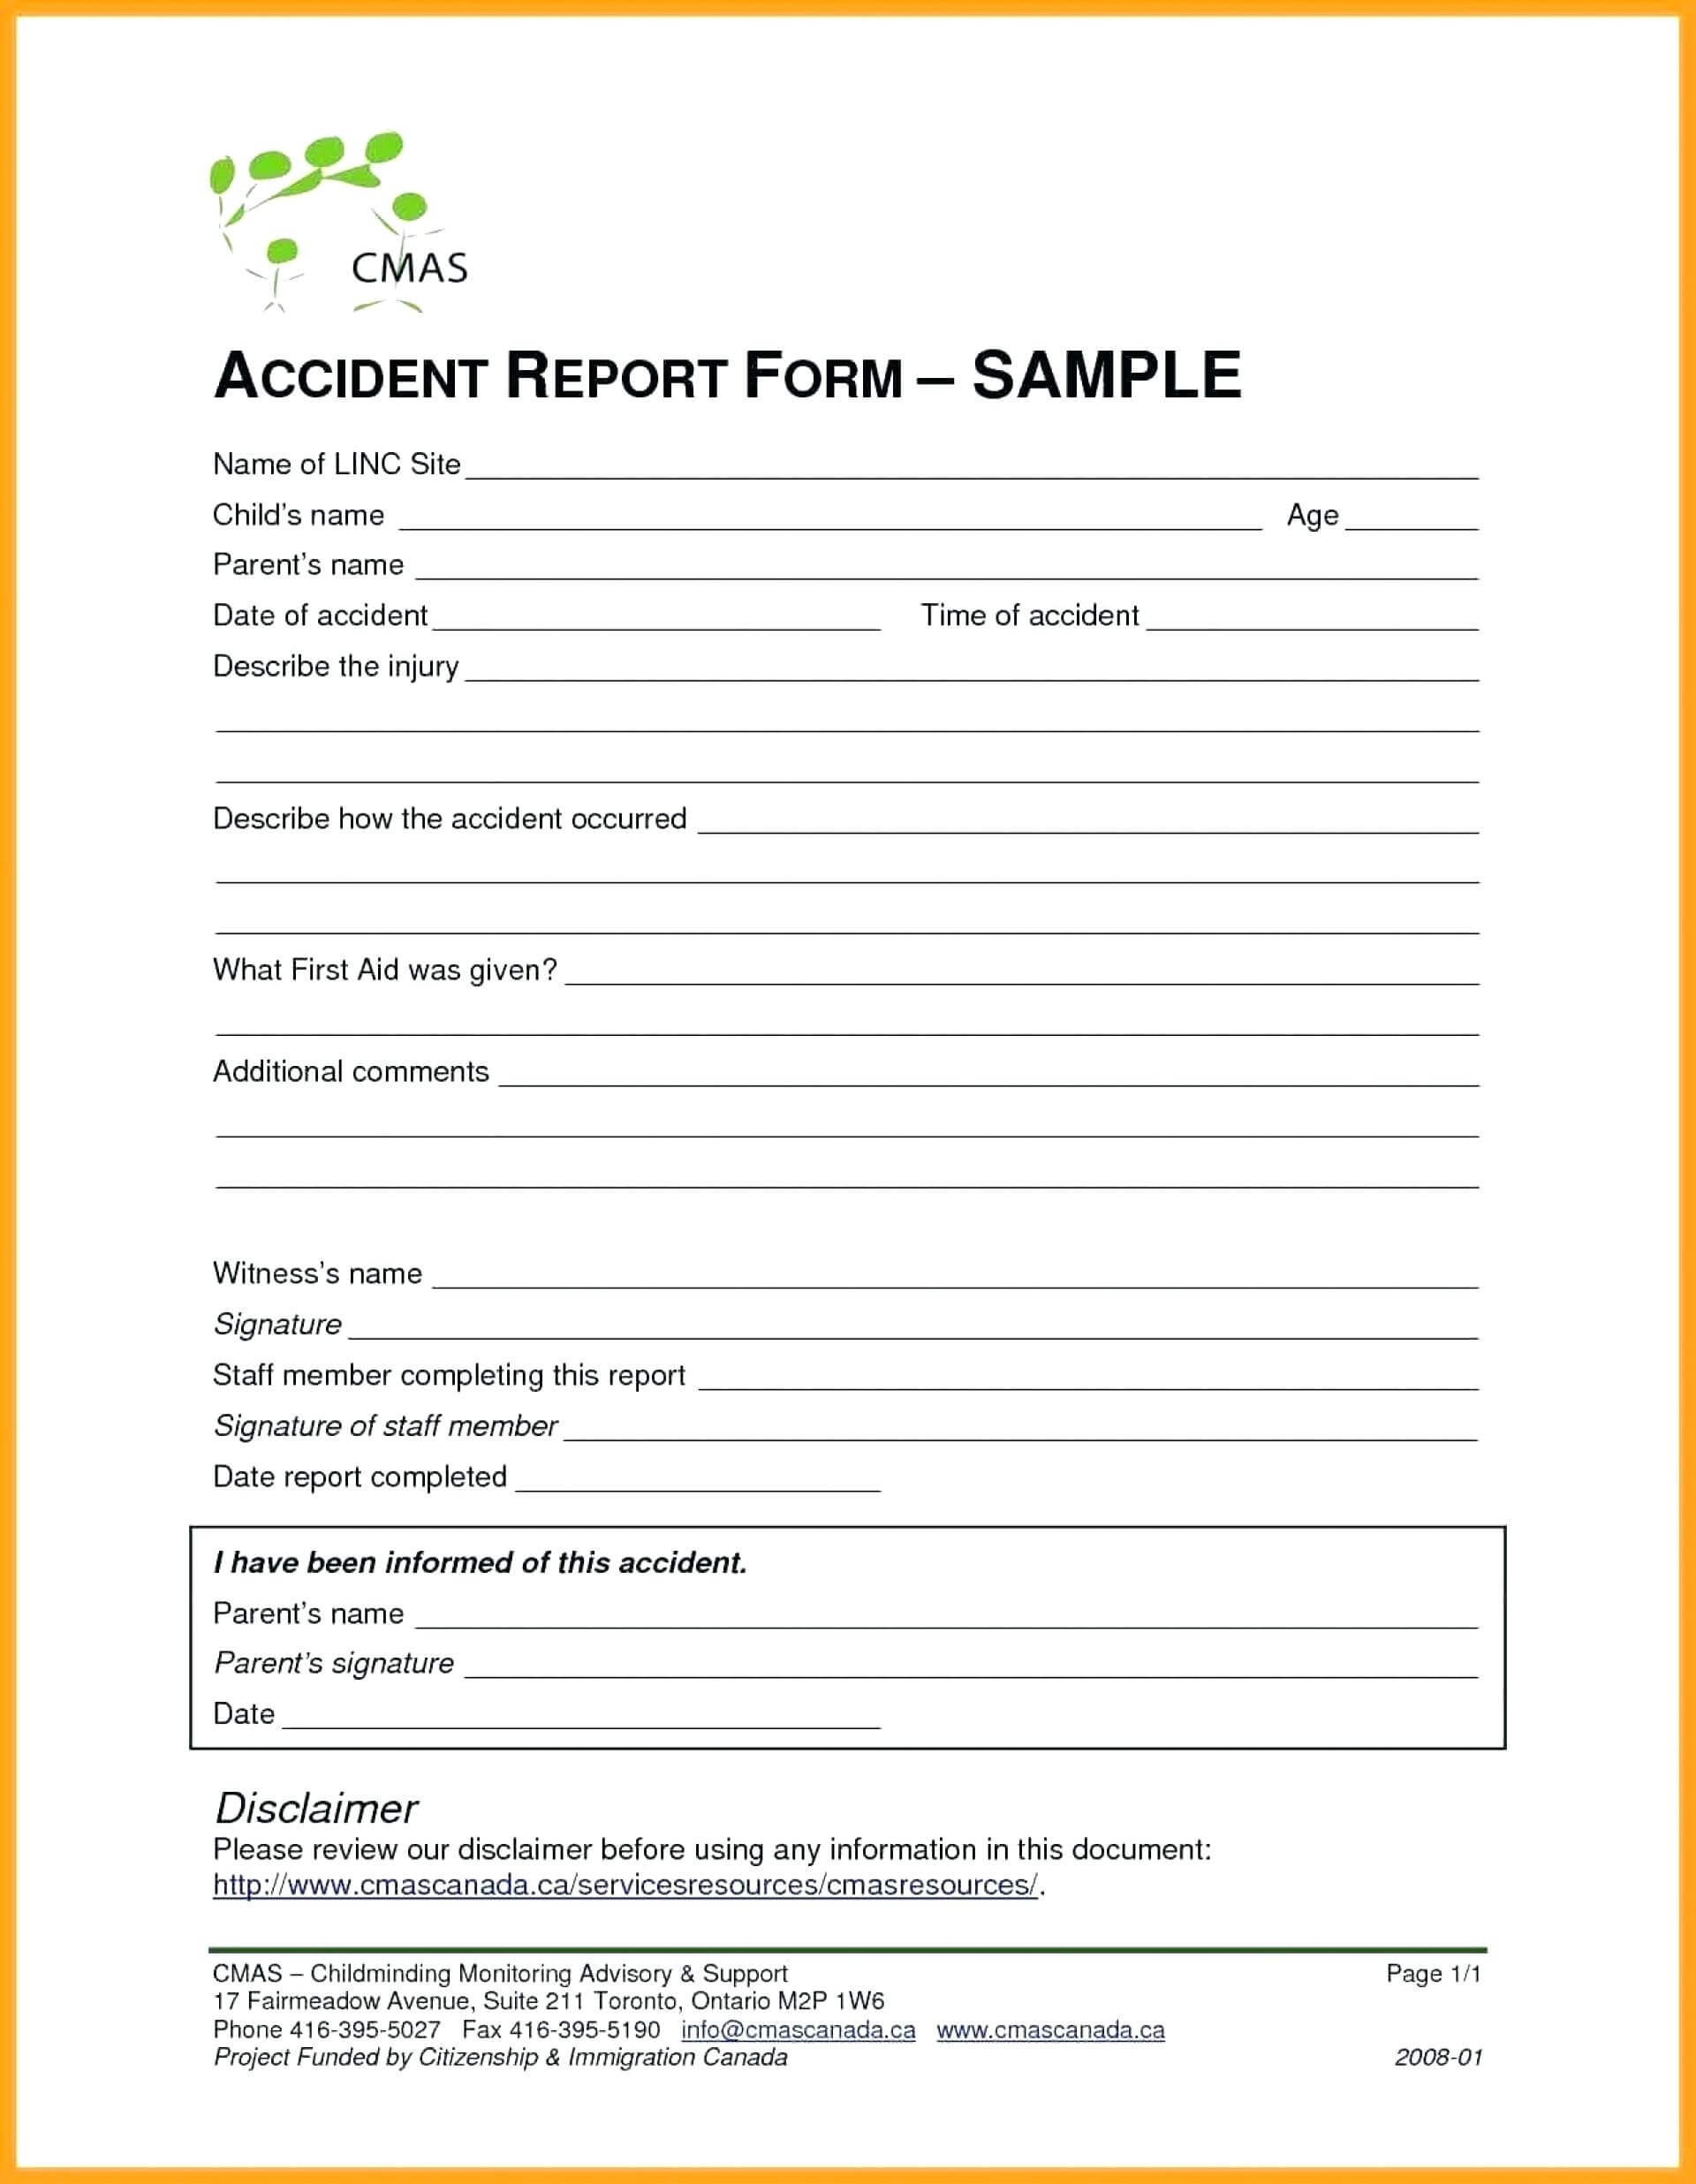 011 Accident Report Forms Template Ideas Daycare Child Care In Hazard Incident Report Form Template